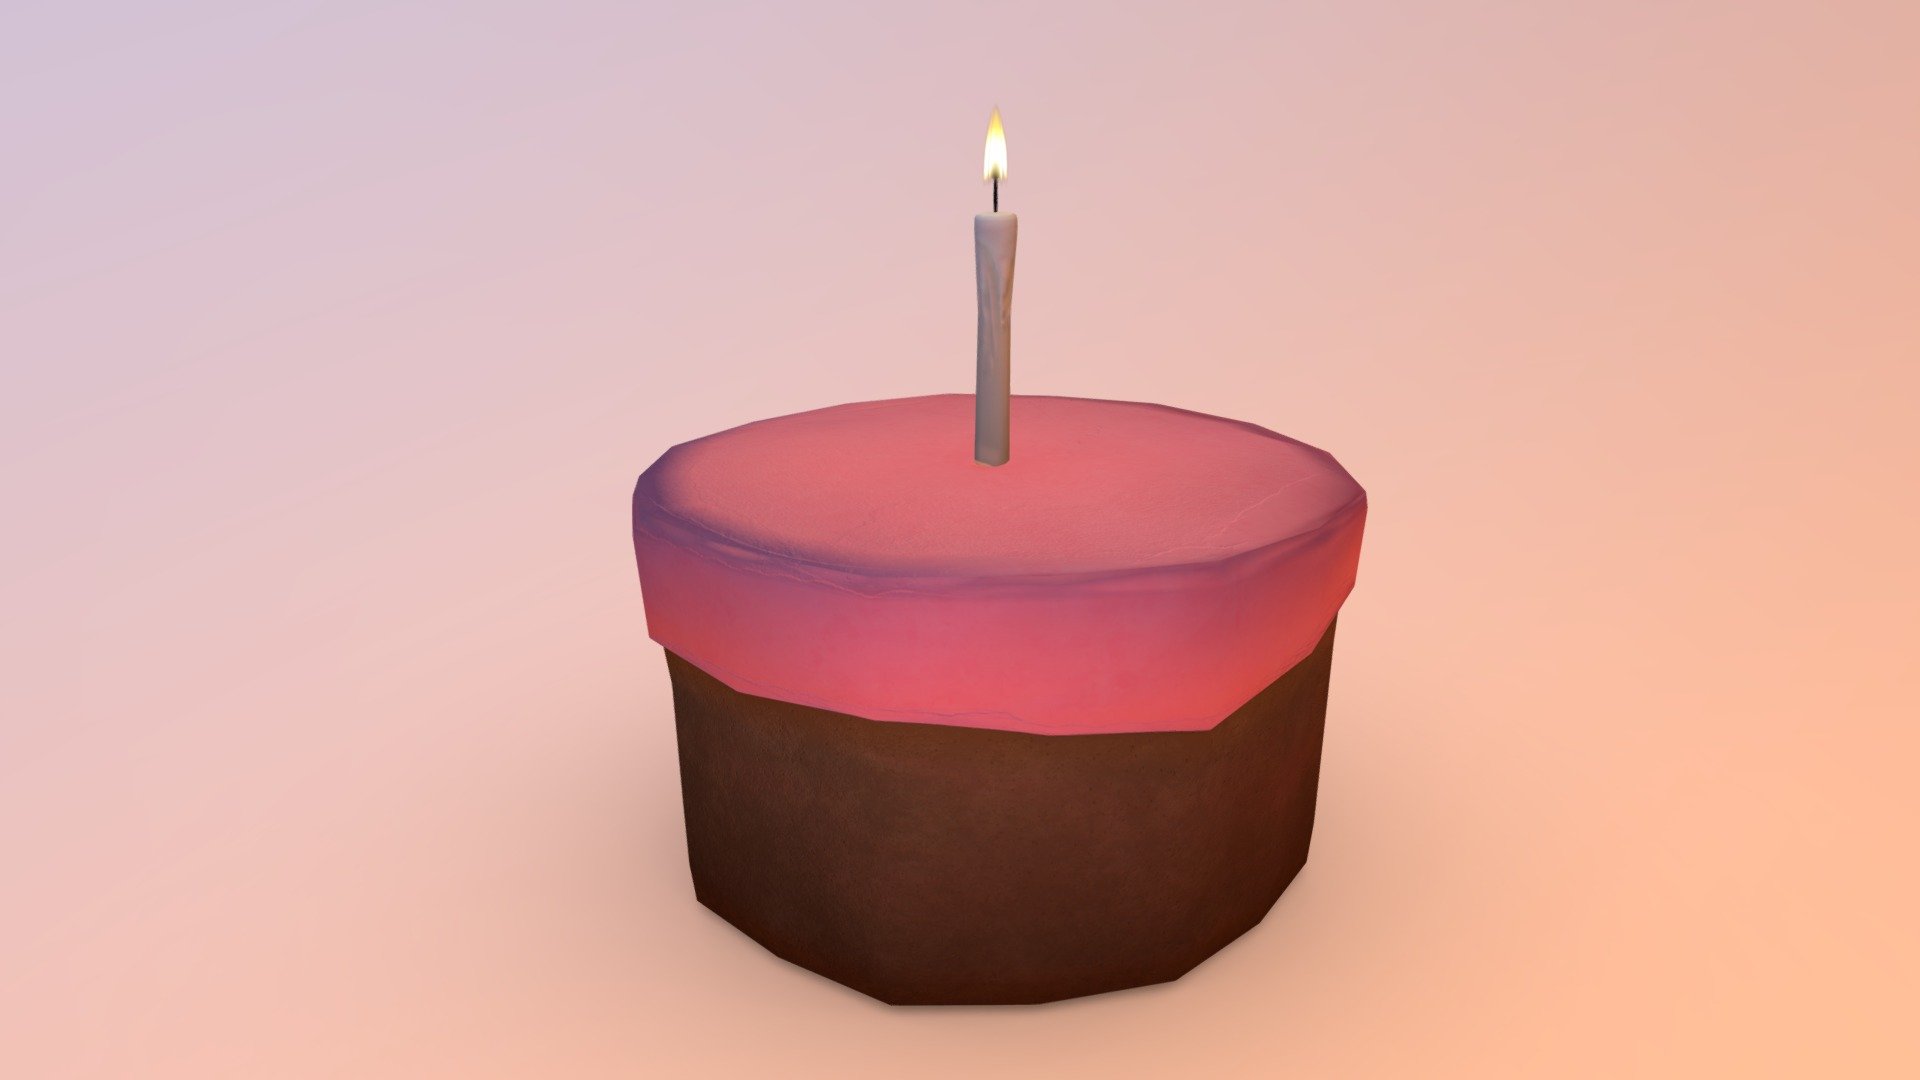 Premium PSD | Cute cake 3d model for the third birthday on a transparent  background